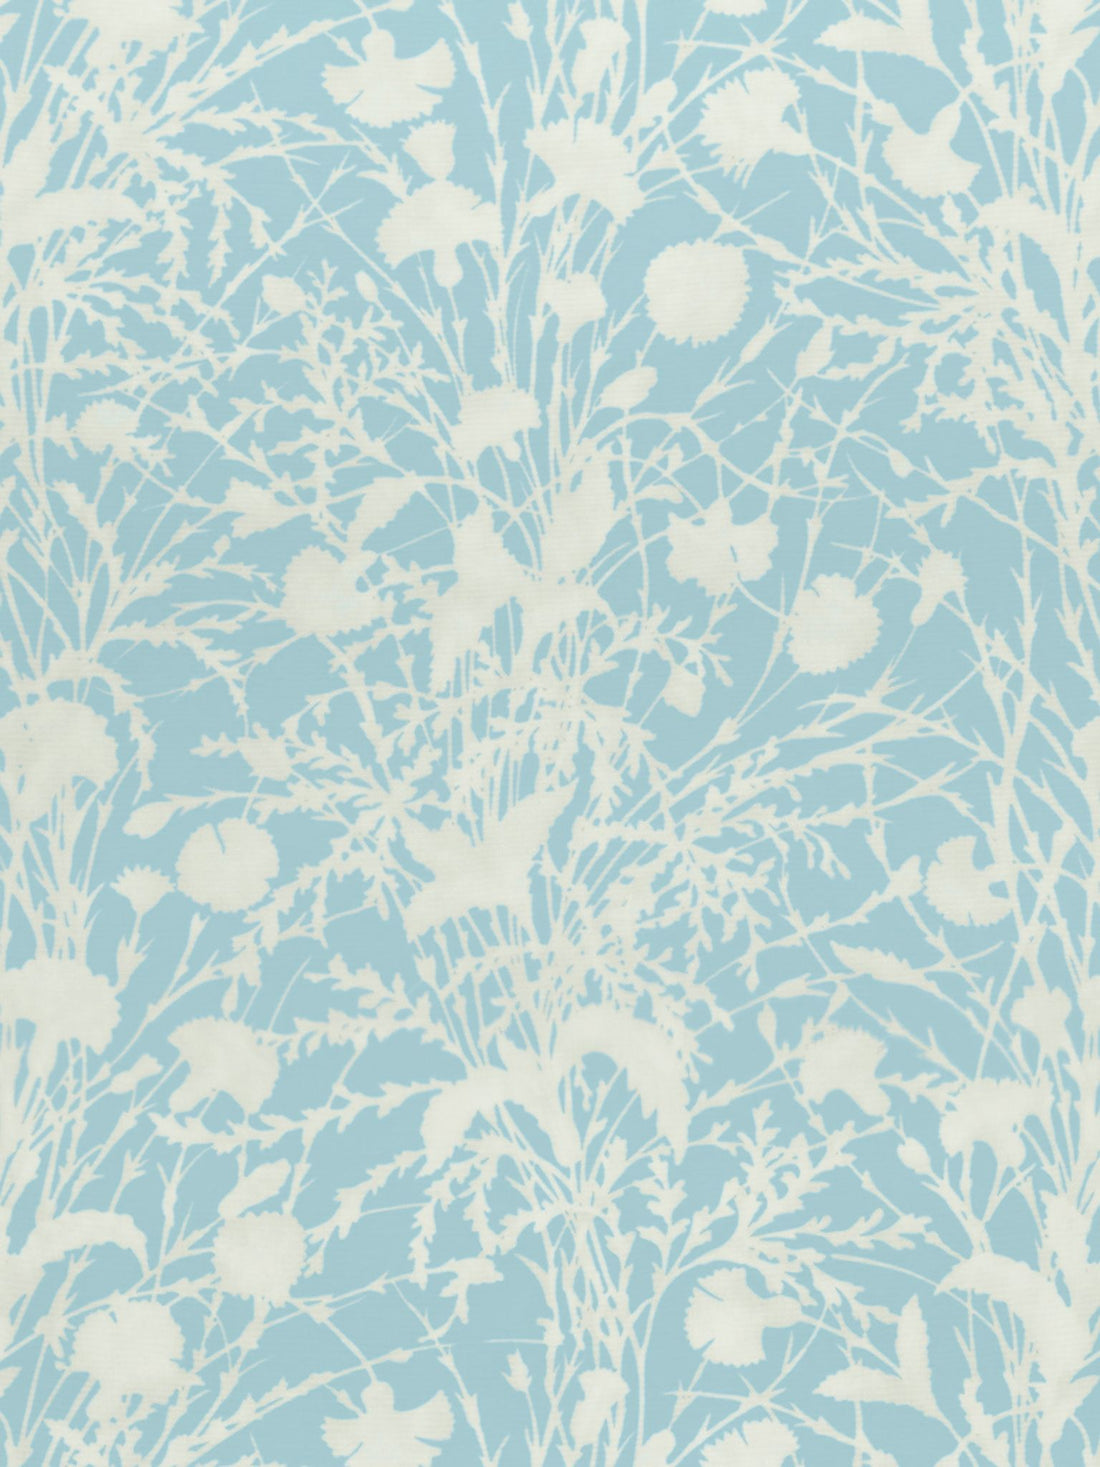 Wildflower fabric in morning sky color - pattern number GW 000216623 - by Scalamandre in the Grey Watkins collection